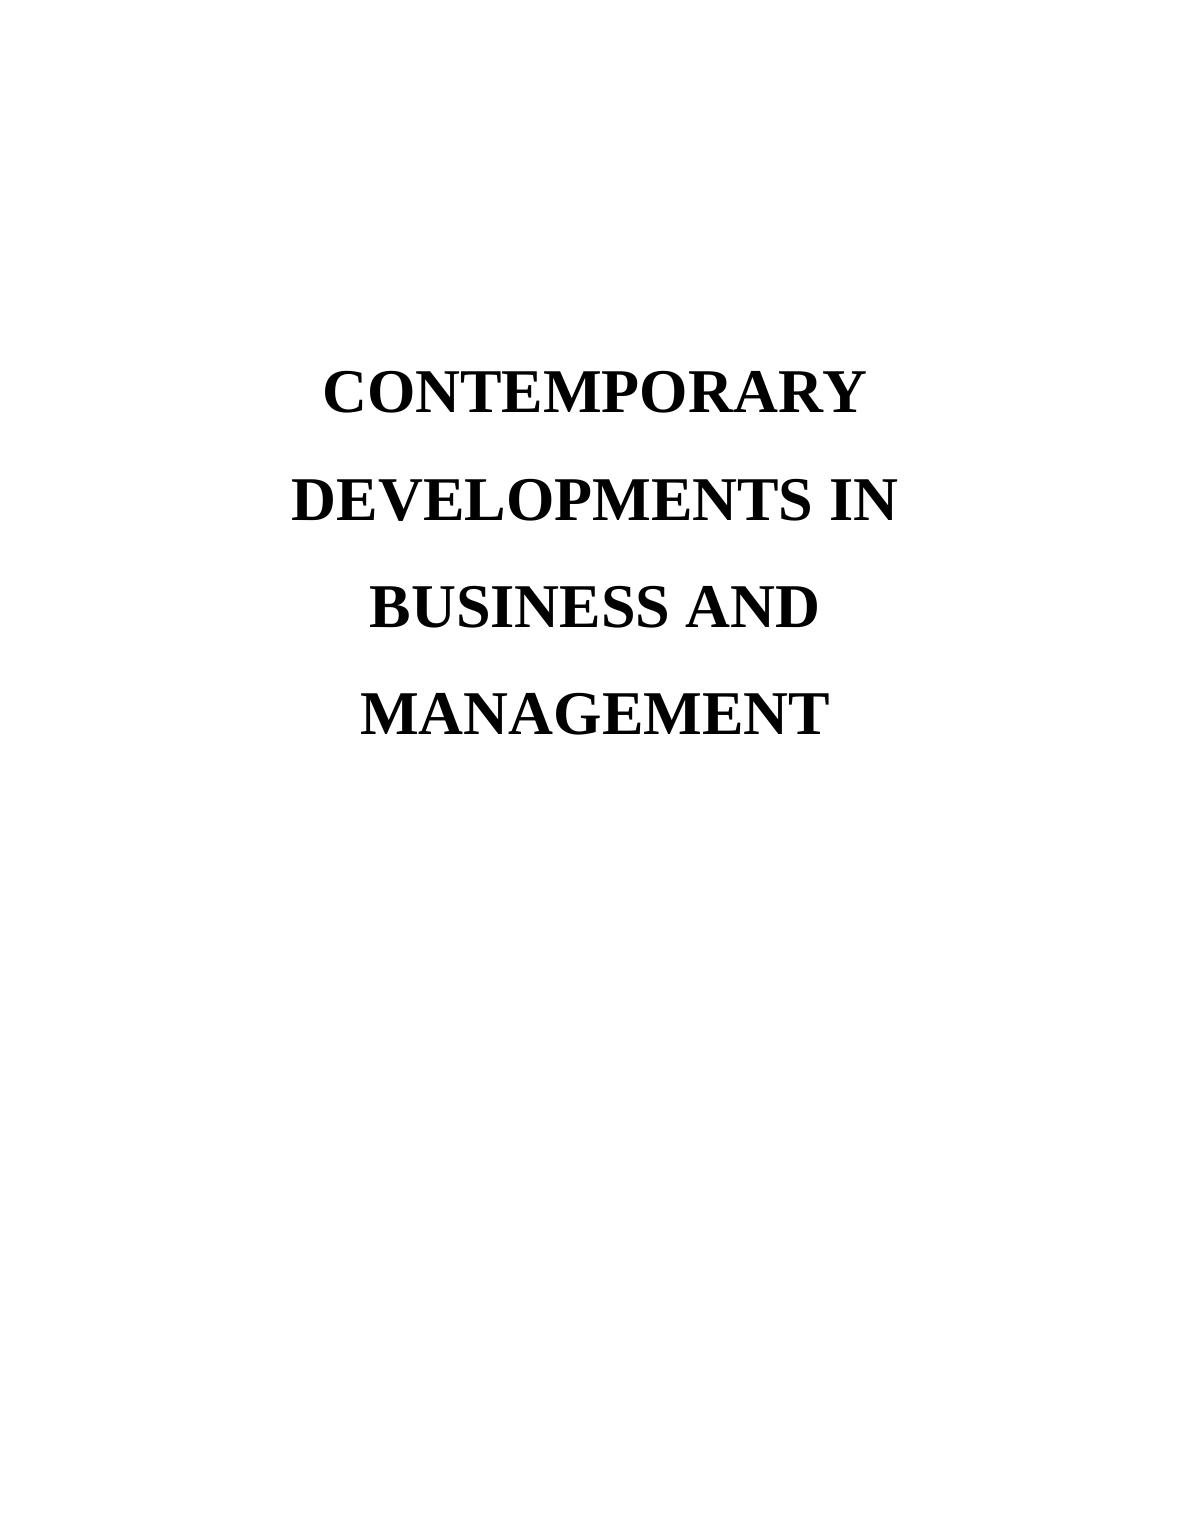 Assignment on Contemporary Developments in Business and Management_1